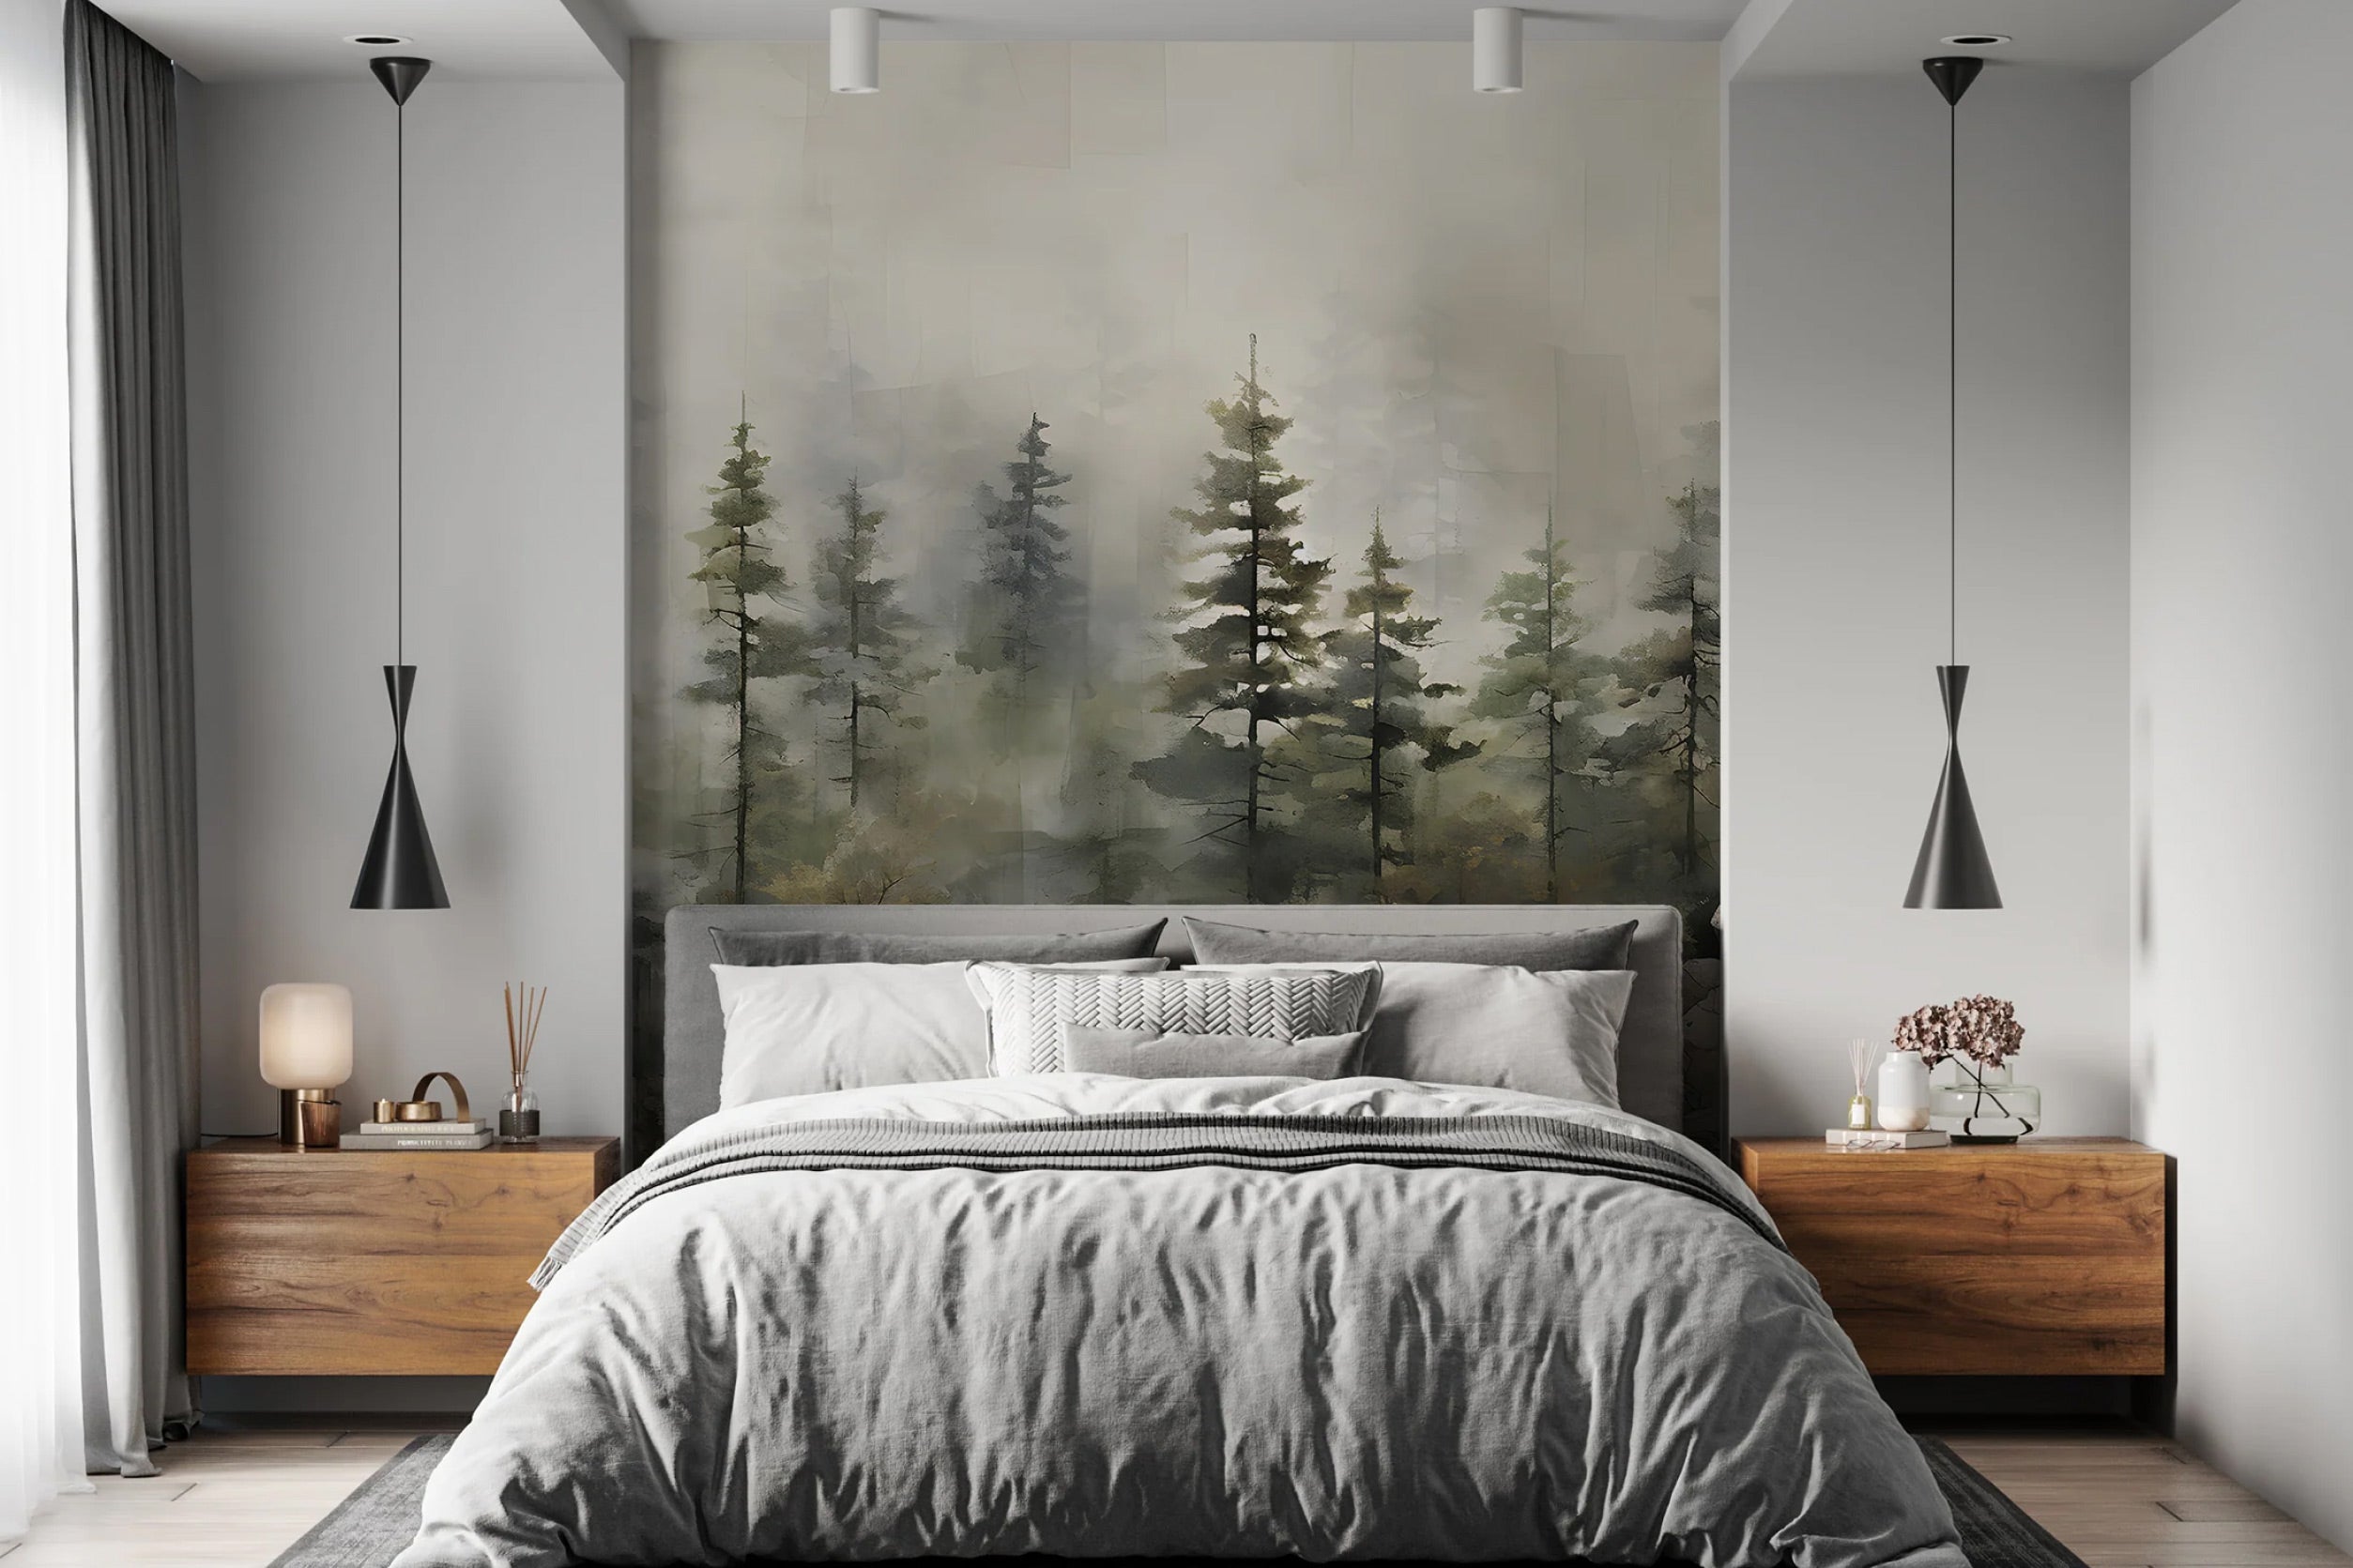 Collection of Wallpaper & Wall Murals Designs for Bedrooms